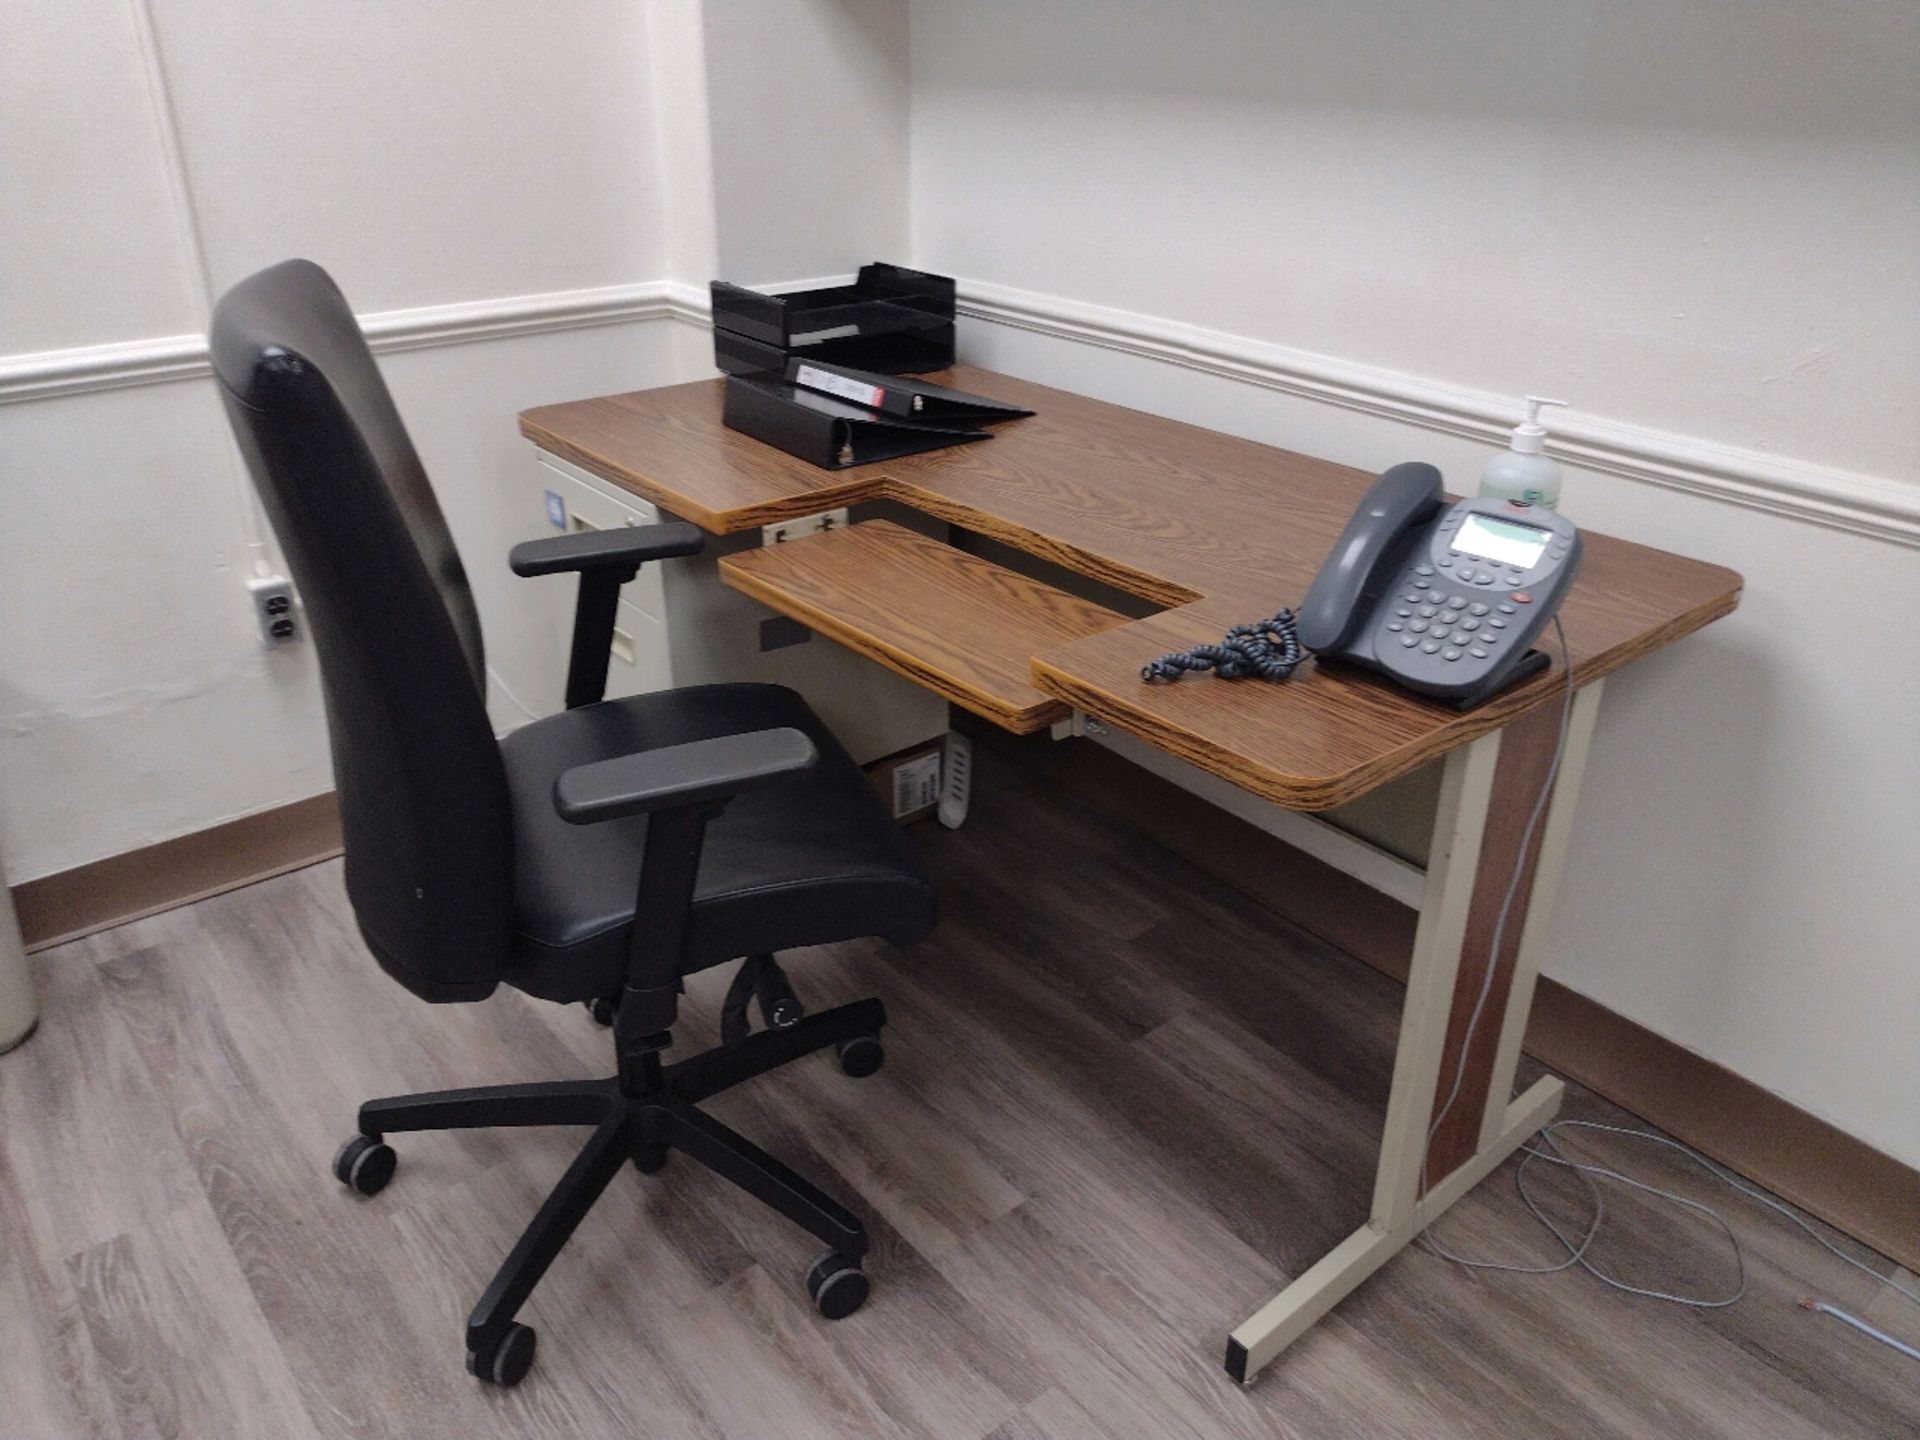 OFFICE TO INCLUDE: DESK, 2- CHAIRS, TELEPHONE AND HP LASERJET M603 PRINTER